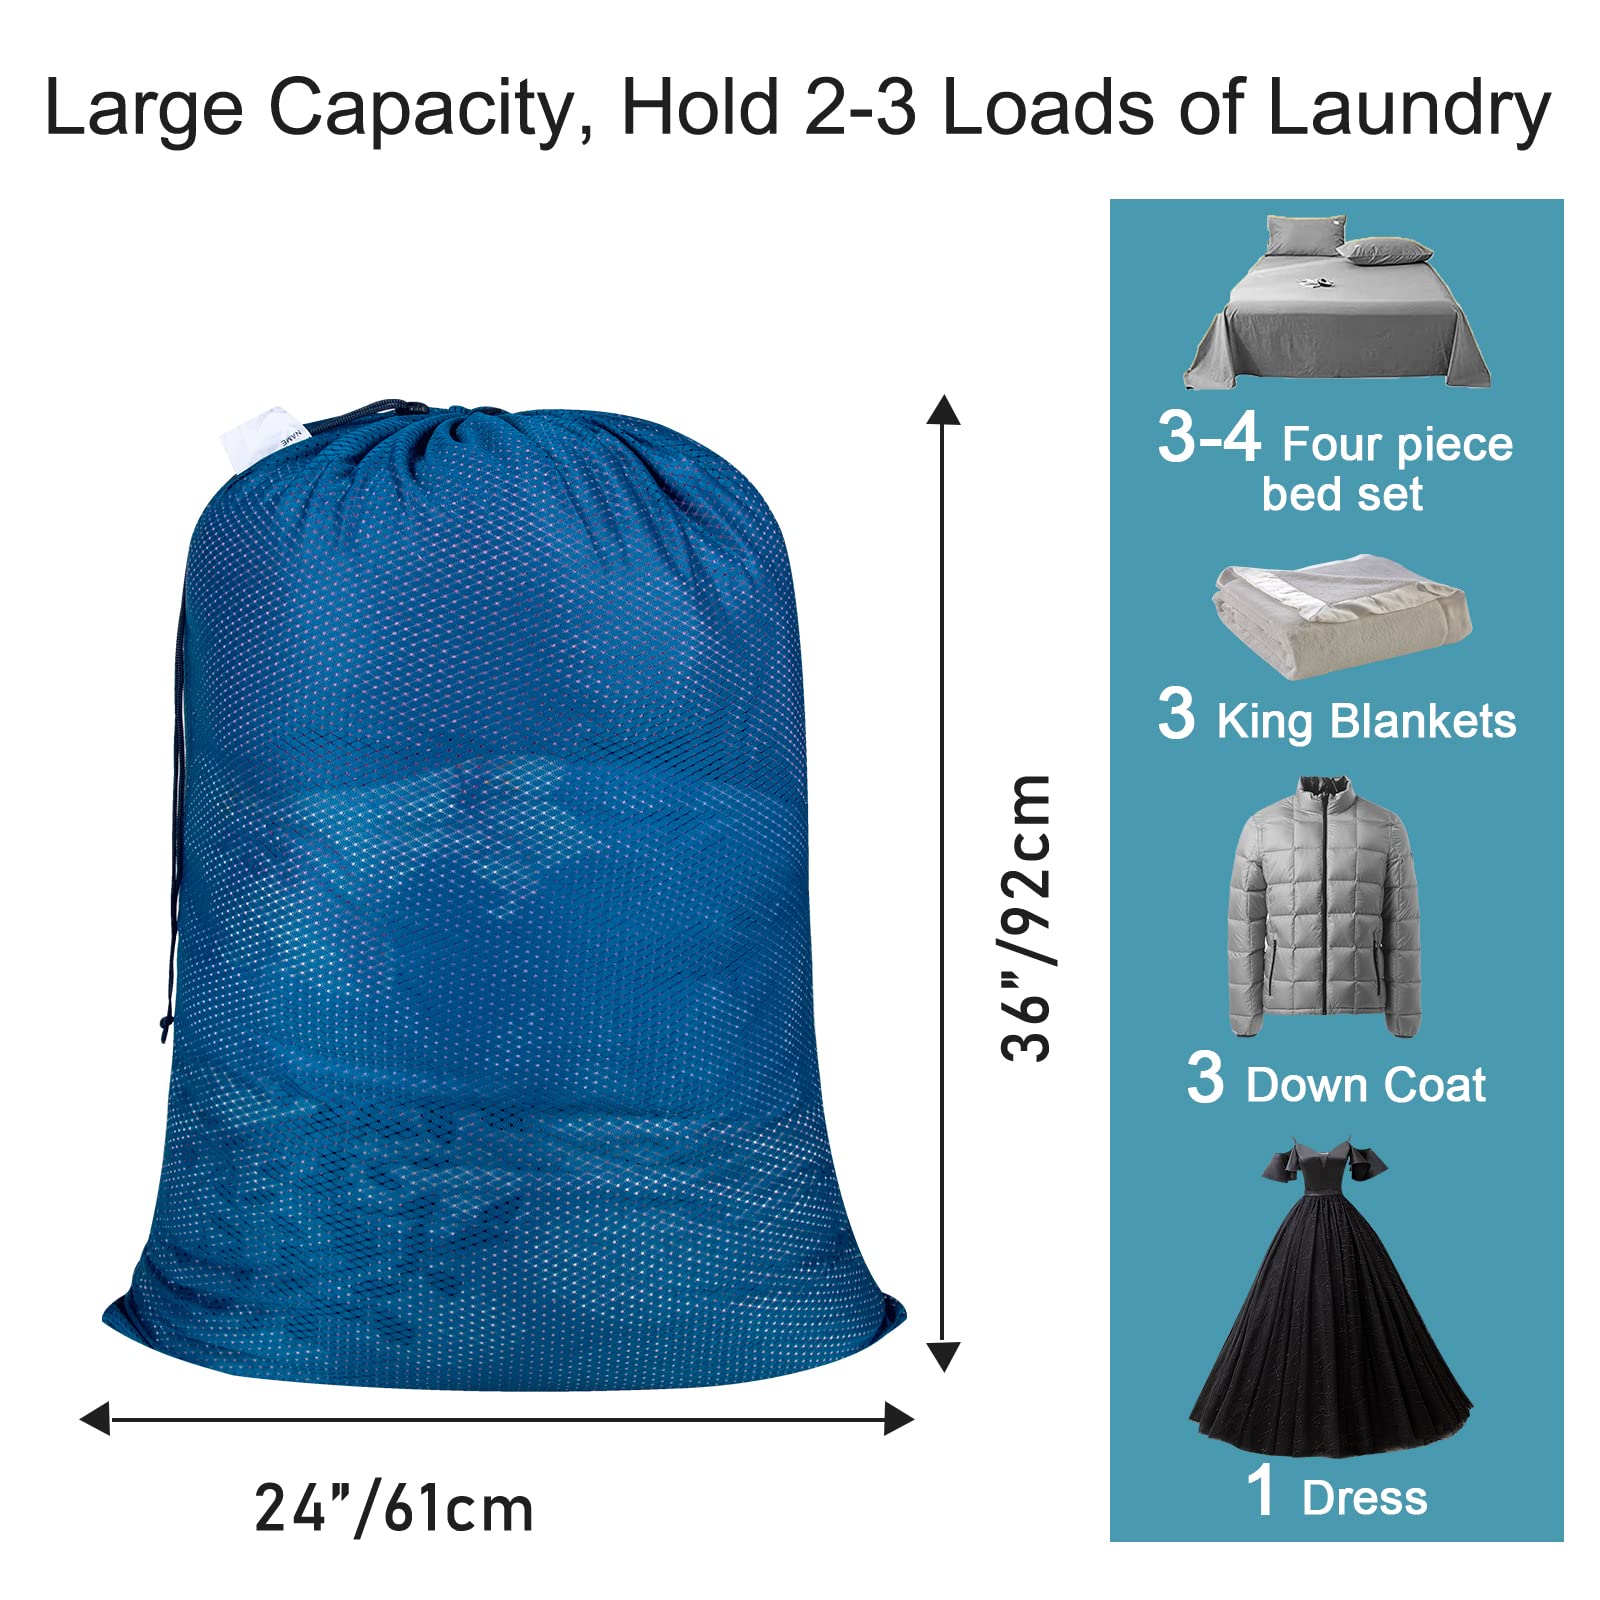 Amazon.com: Heavy Duty Laundry Bag 115L, Sturdy Laundry Backpack Bag Extra  Large, Dorm Room Essential for Guys, Khaki Laundry Bag Backpack for Camp,  XL Laundromat Bag, Laundry Duffel Bag for College :